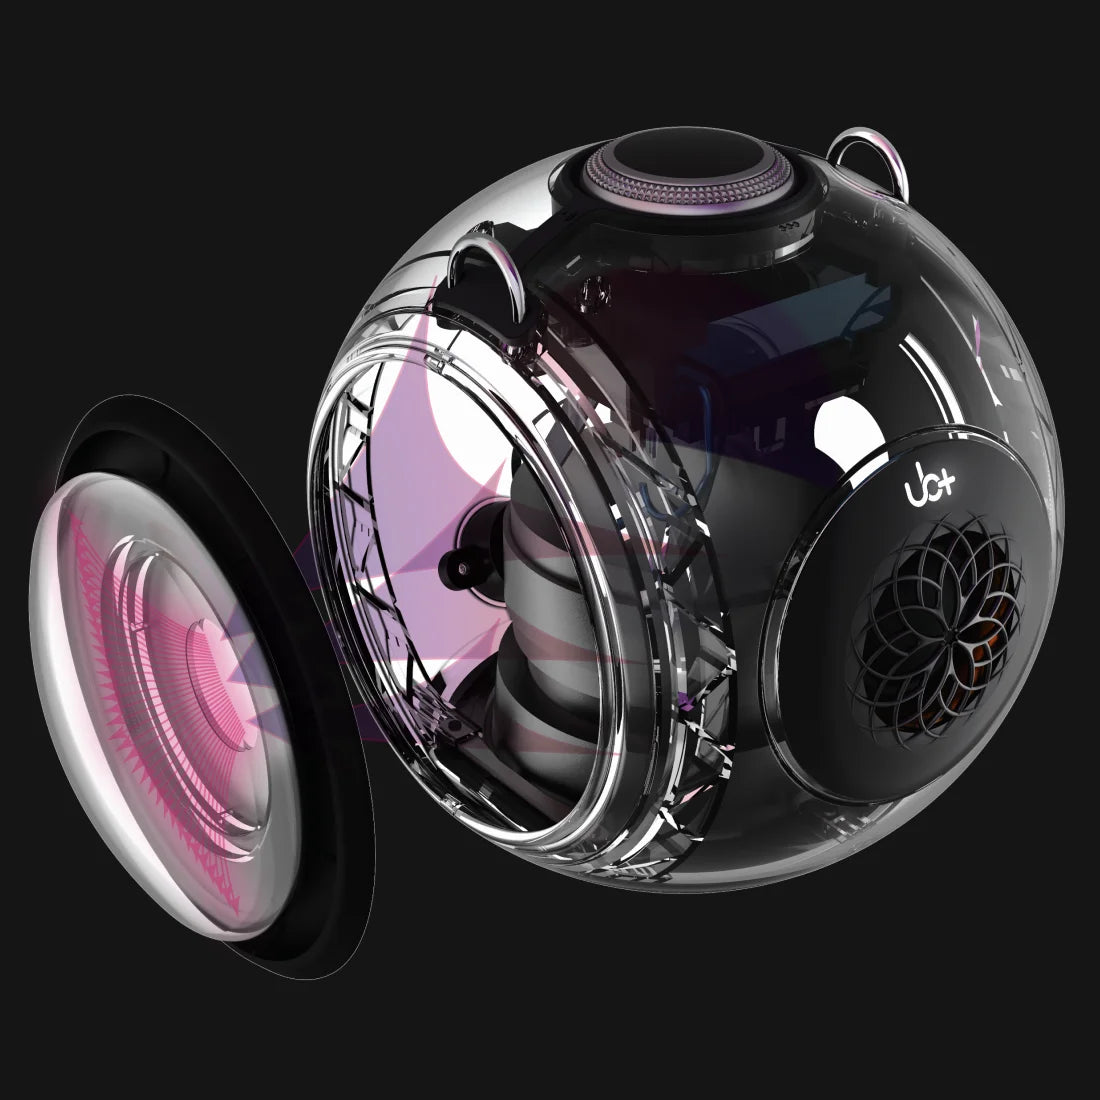 dB1 doubleBASS 3D render showing the internal structure of the speaker, the woofer and the circle design 